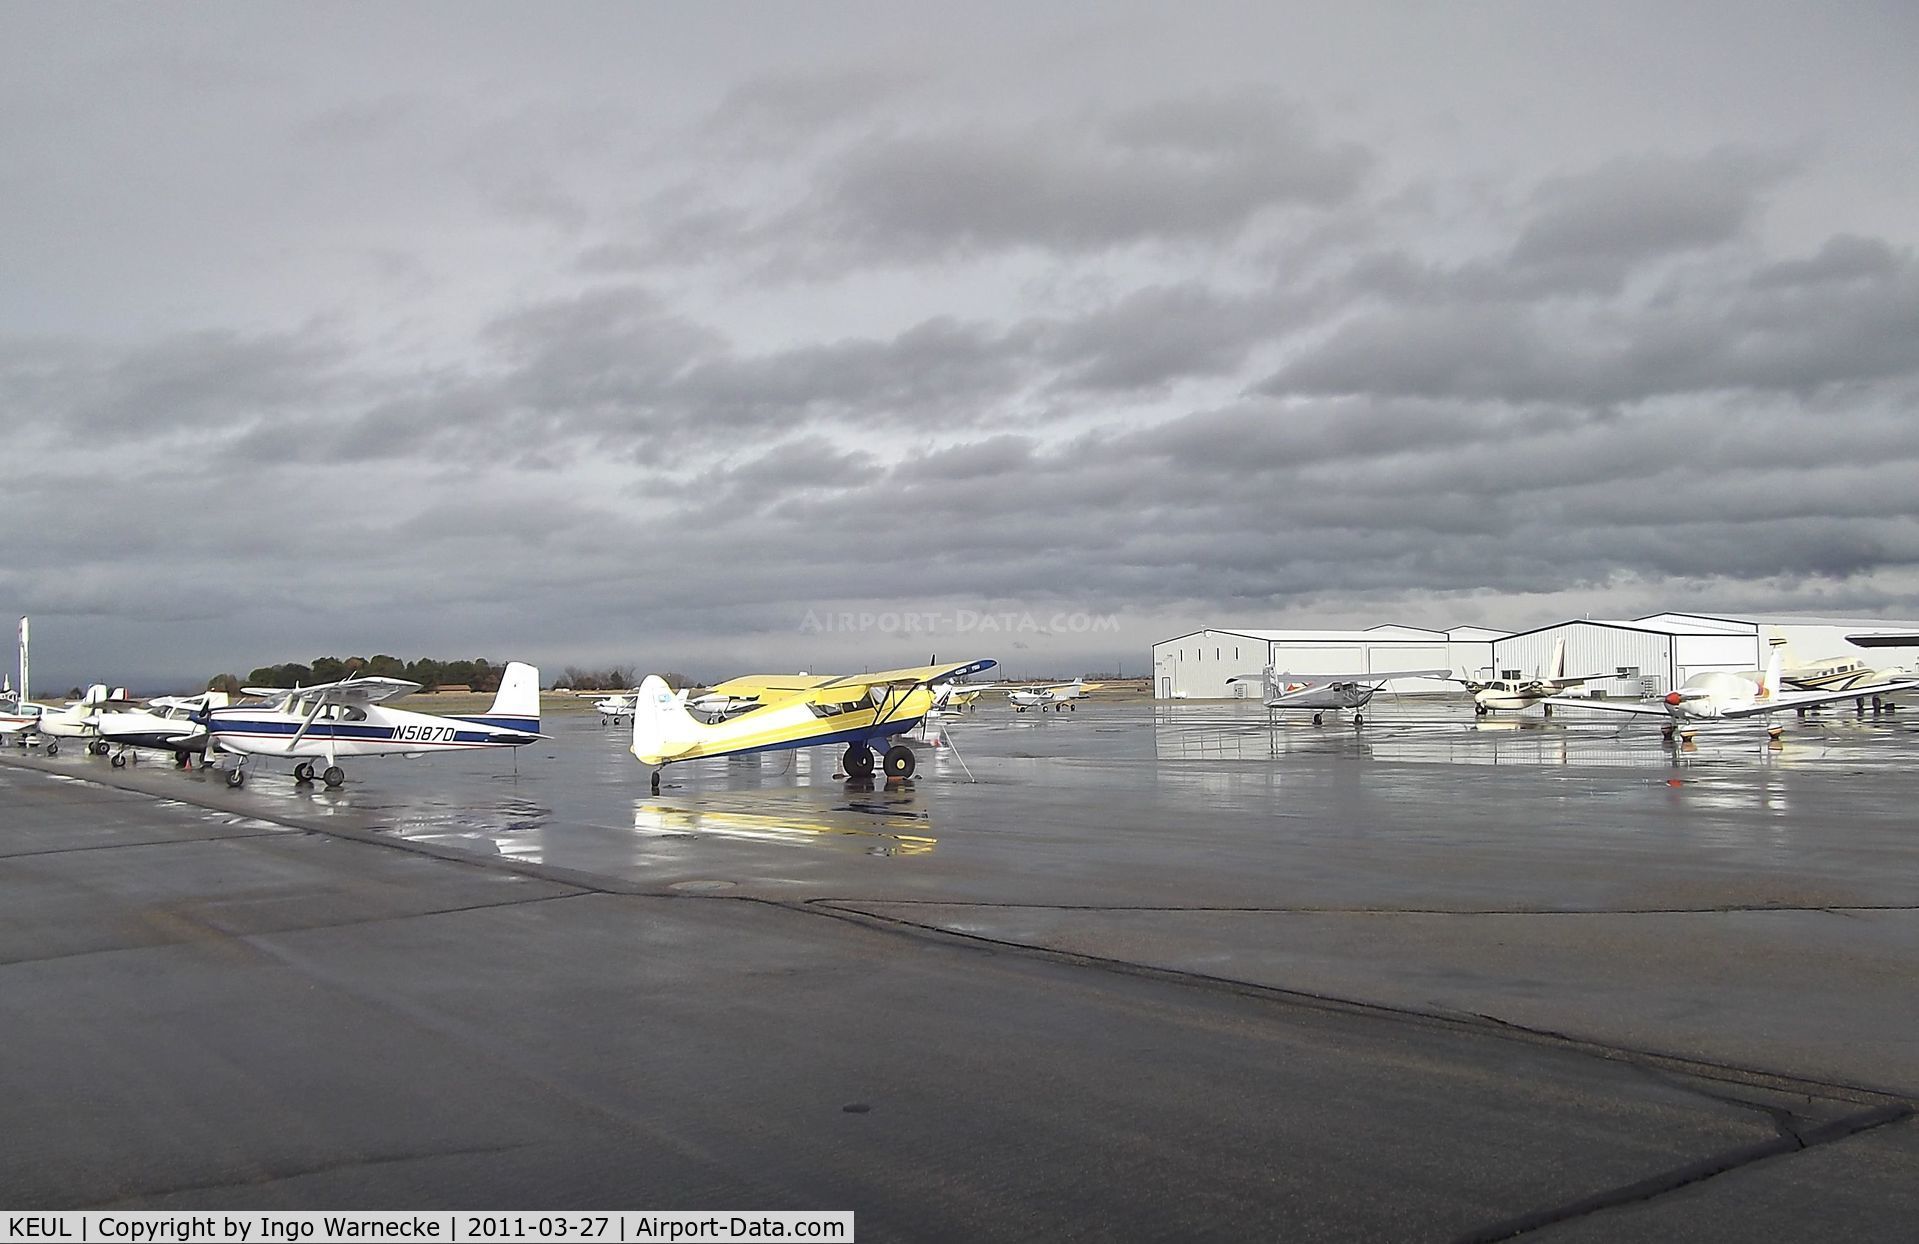 Caldwell Industrial Airport (EUL) - a look at the apron at Caldwell Industrial Airport